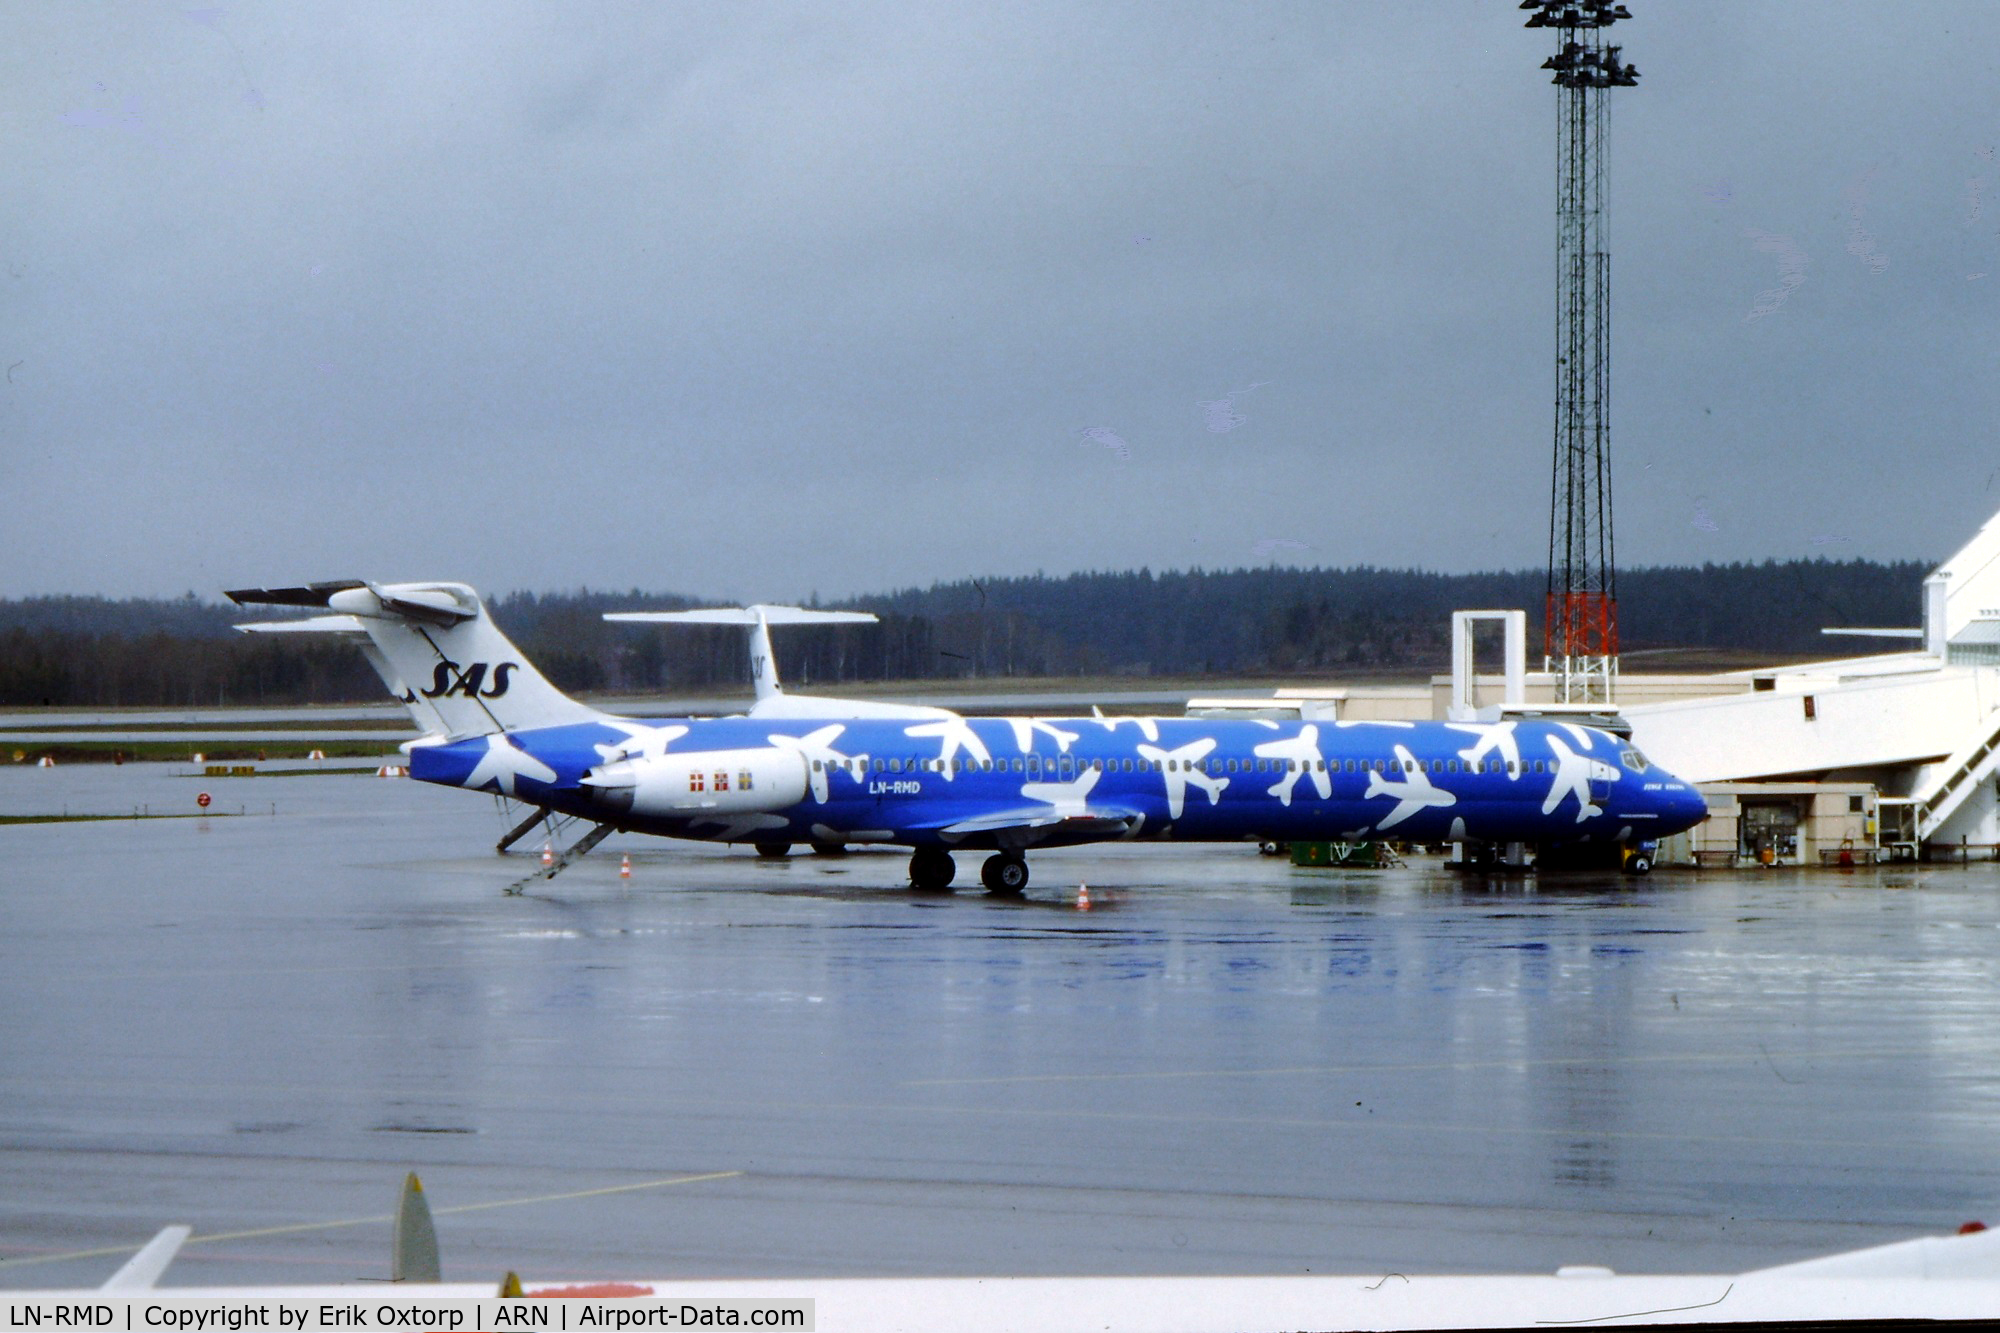 LN-RMD, 1987 McDonnell Douglas MD-82 (DC-9-82) C/N 49555, LN-RMD at the gate in ARN